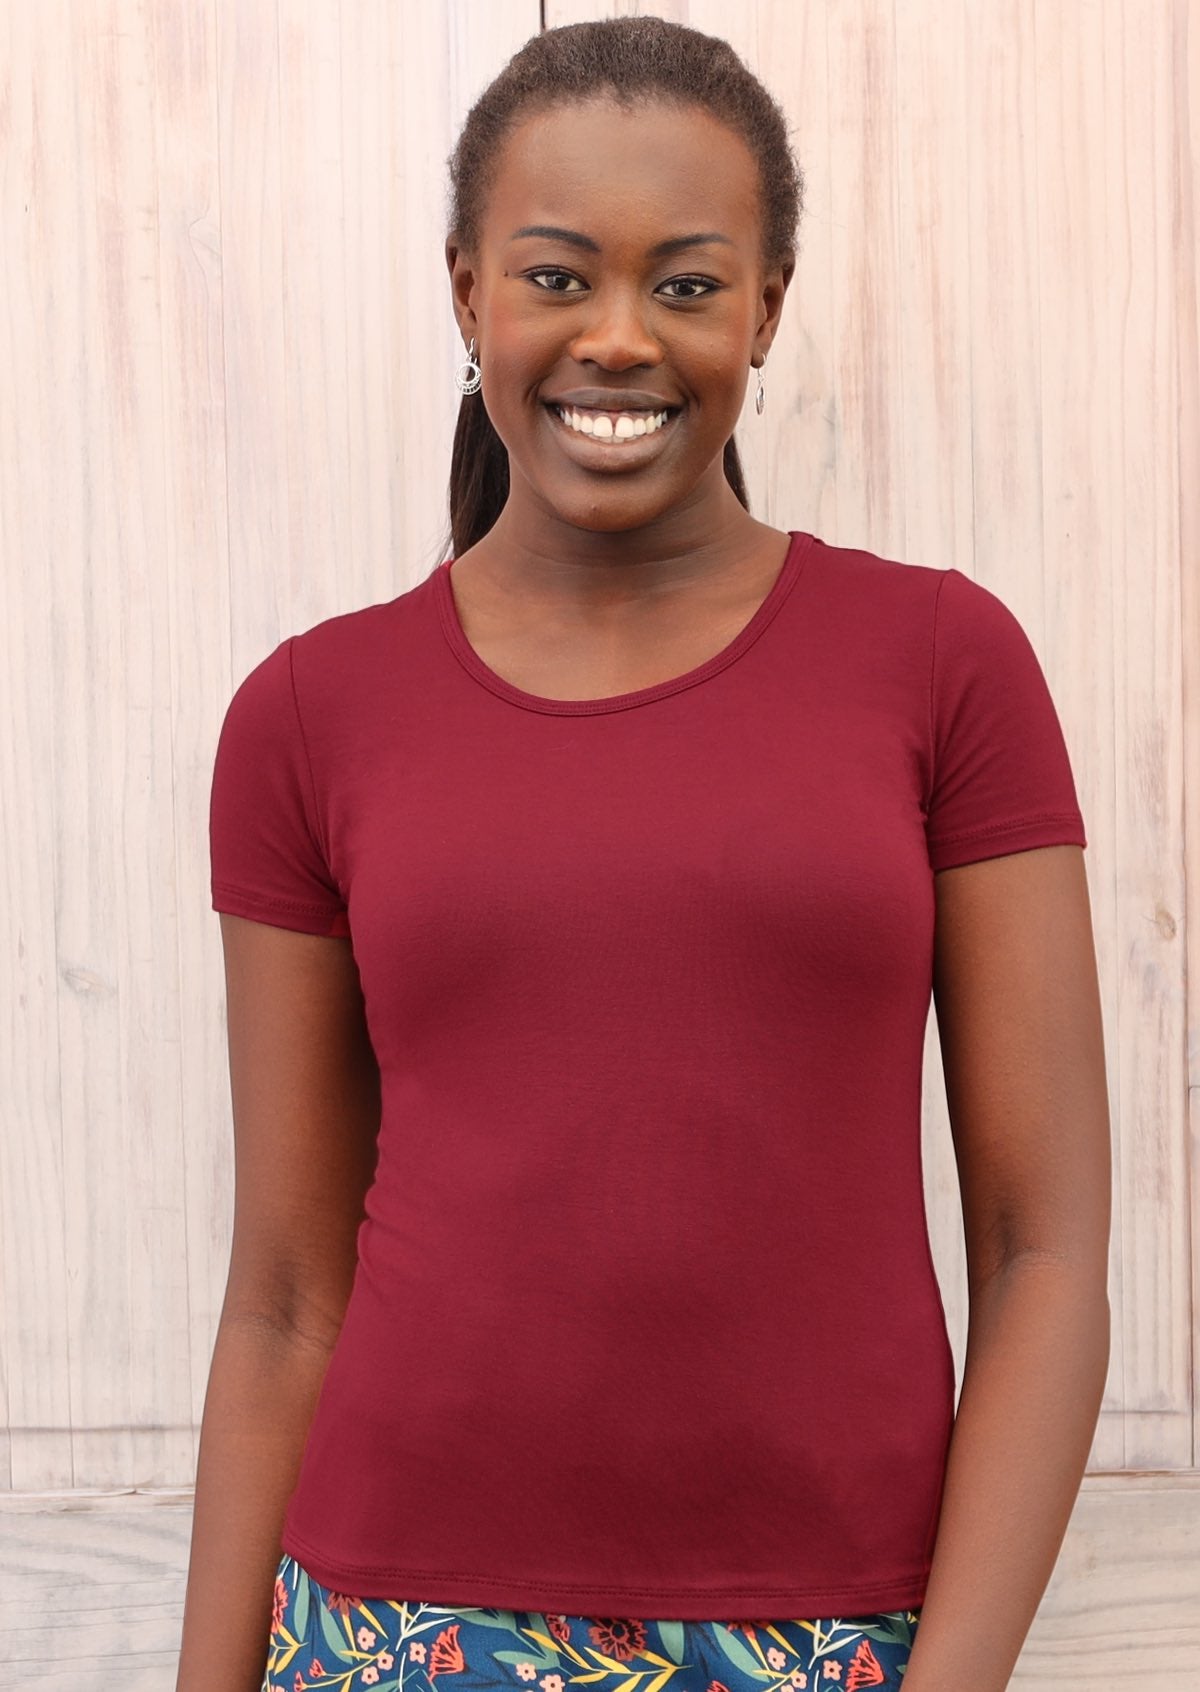 Woman wearing a scoop neck maroon rayon fitted t-shirt.